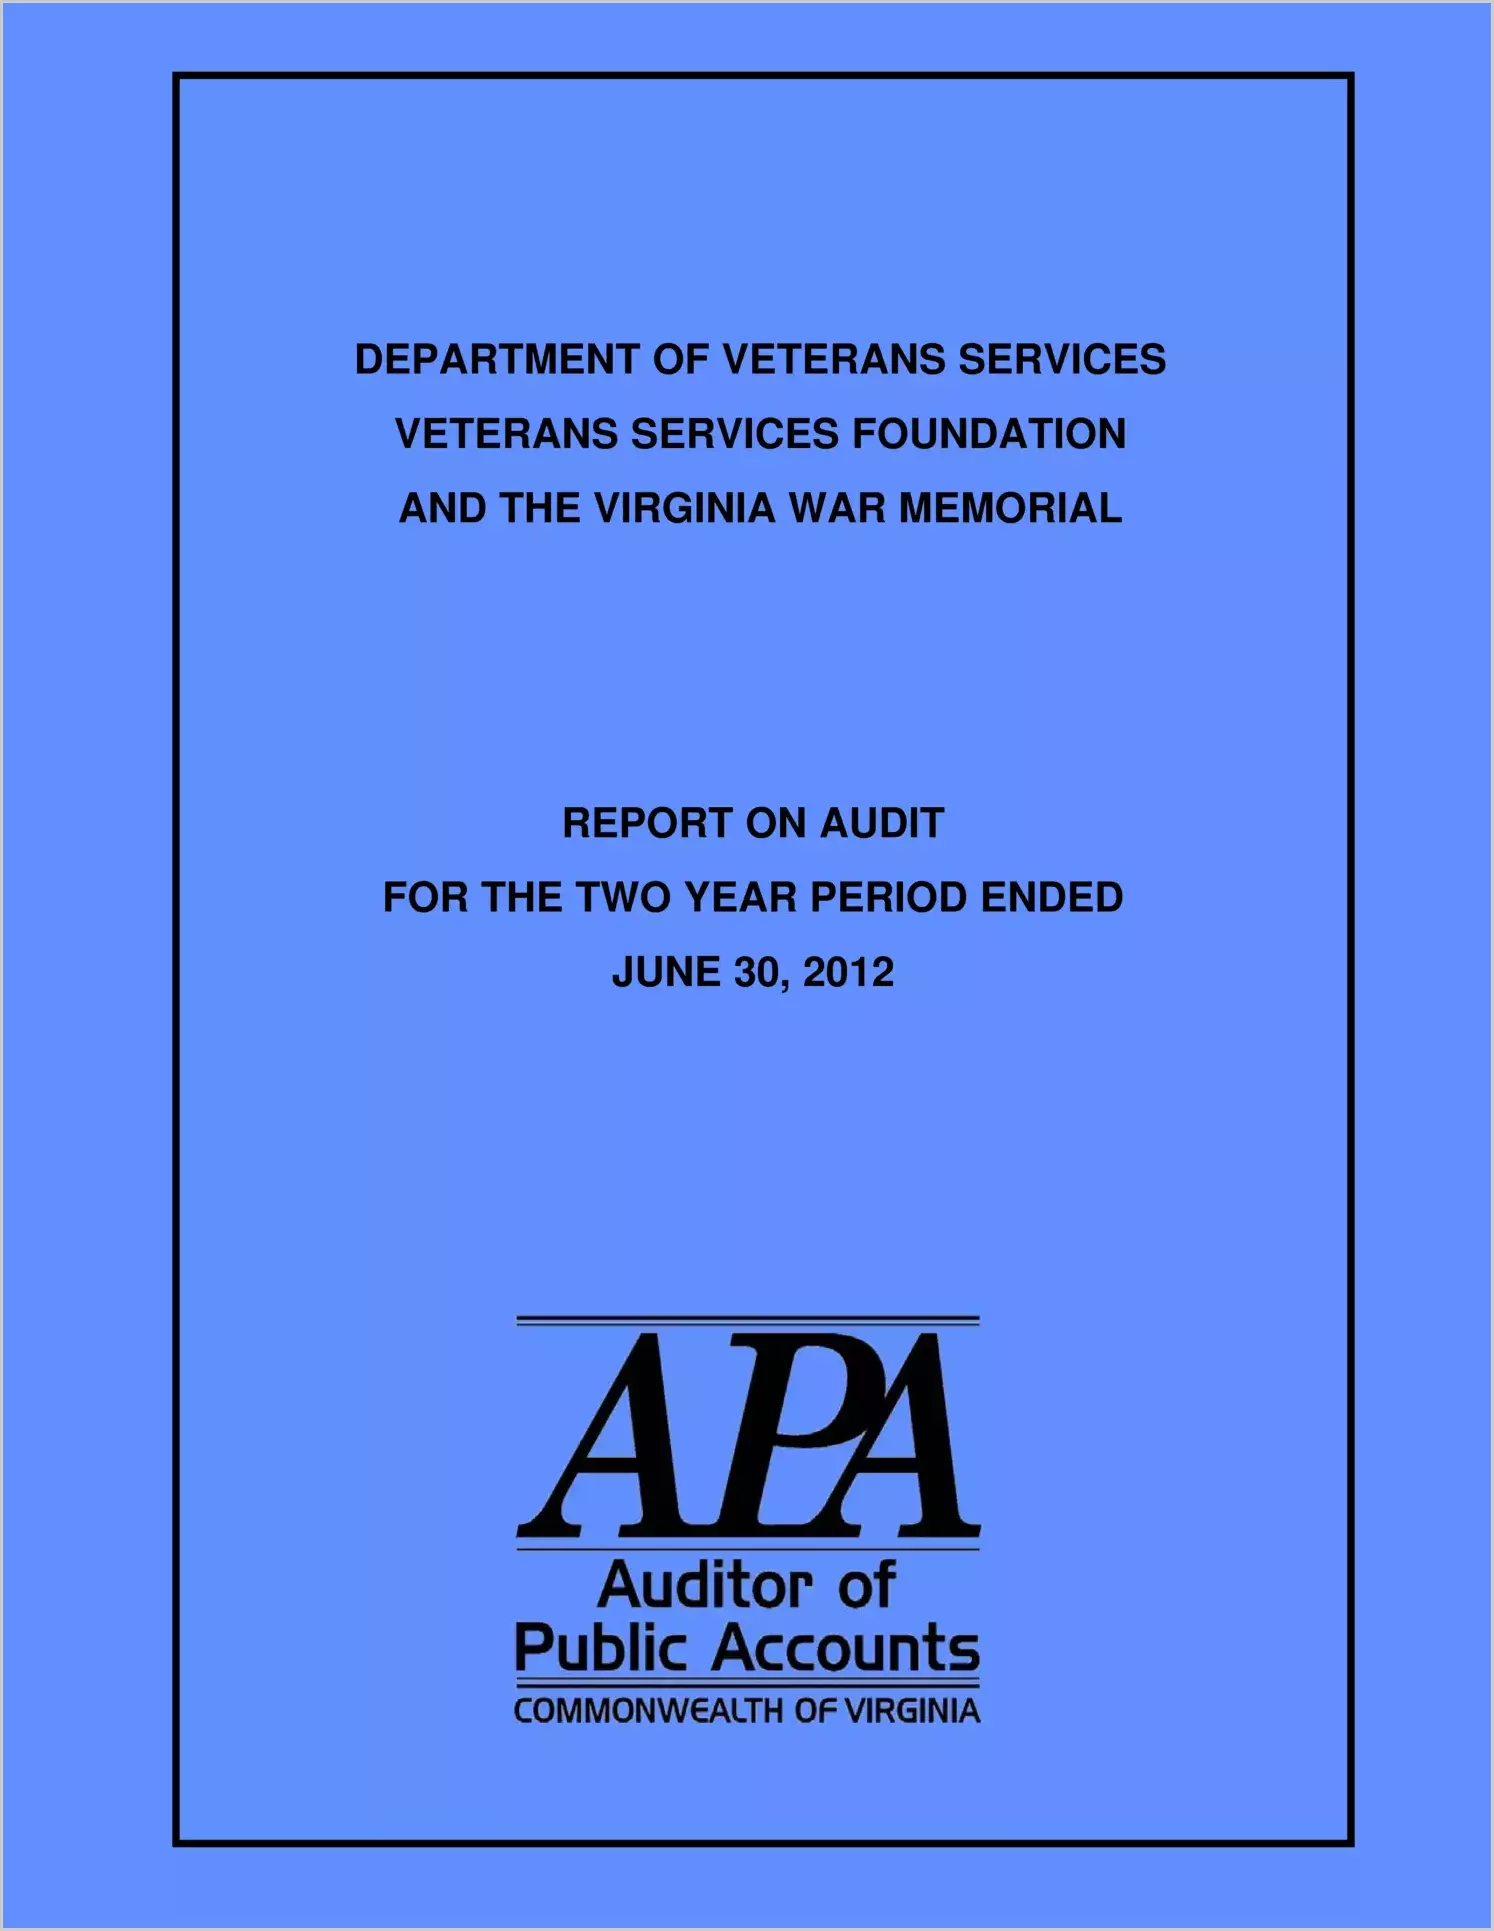 Department of Veterans Services and the Veterans Services Foundation for the two-year period ended June 30, 2012